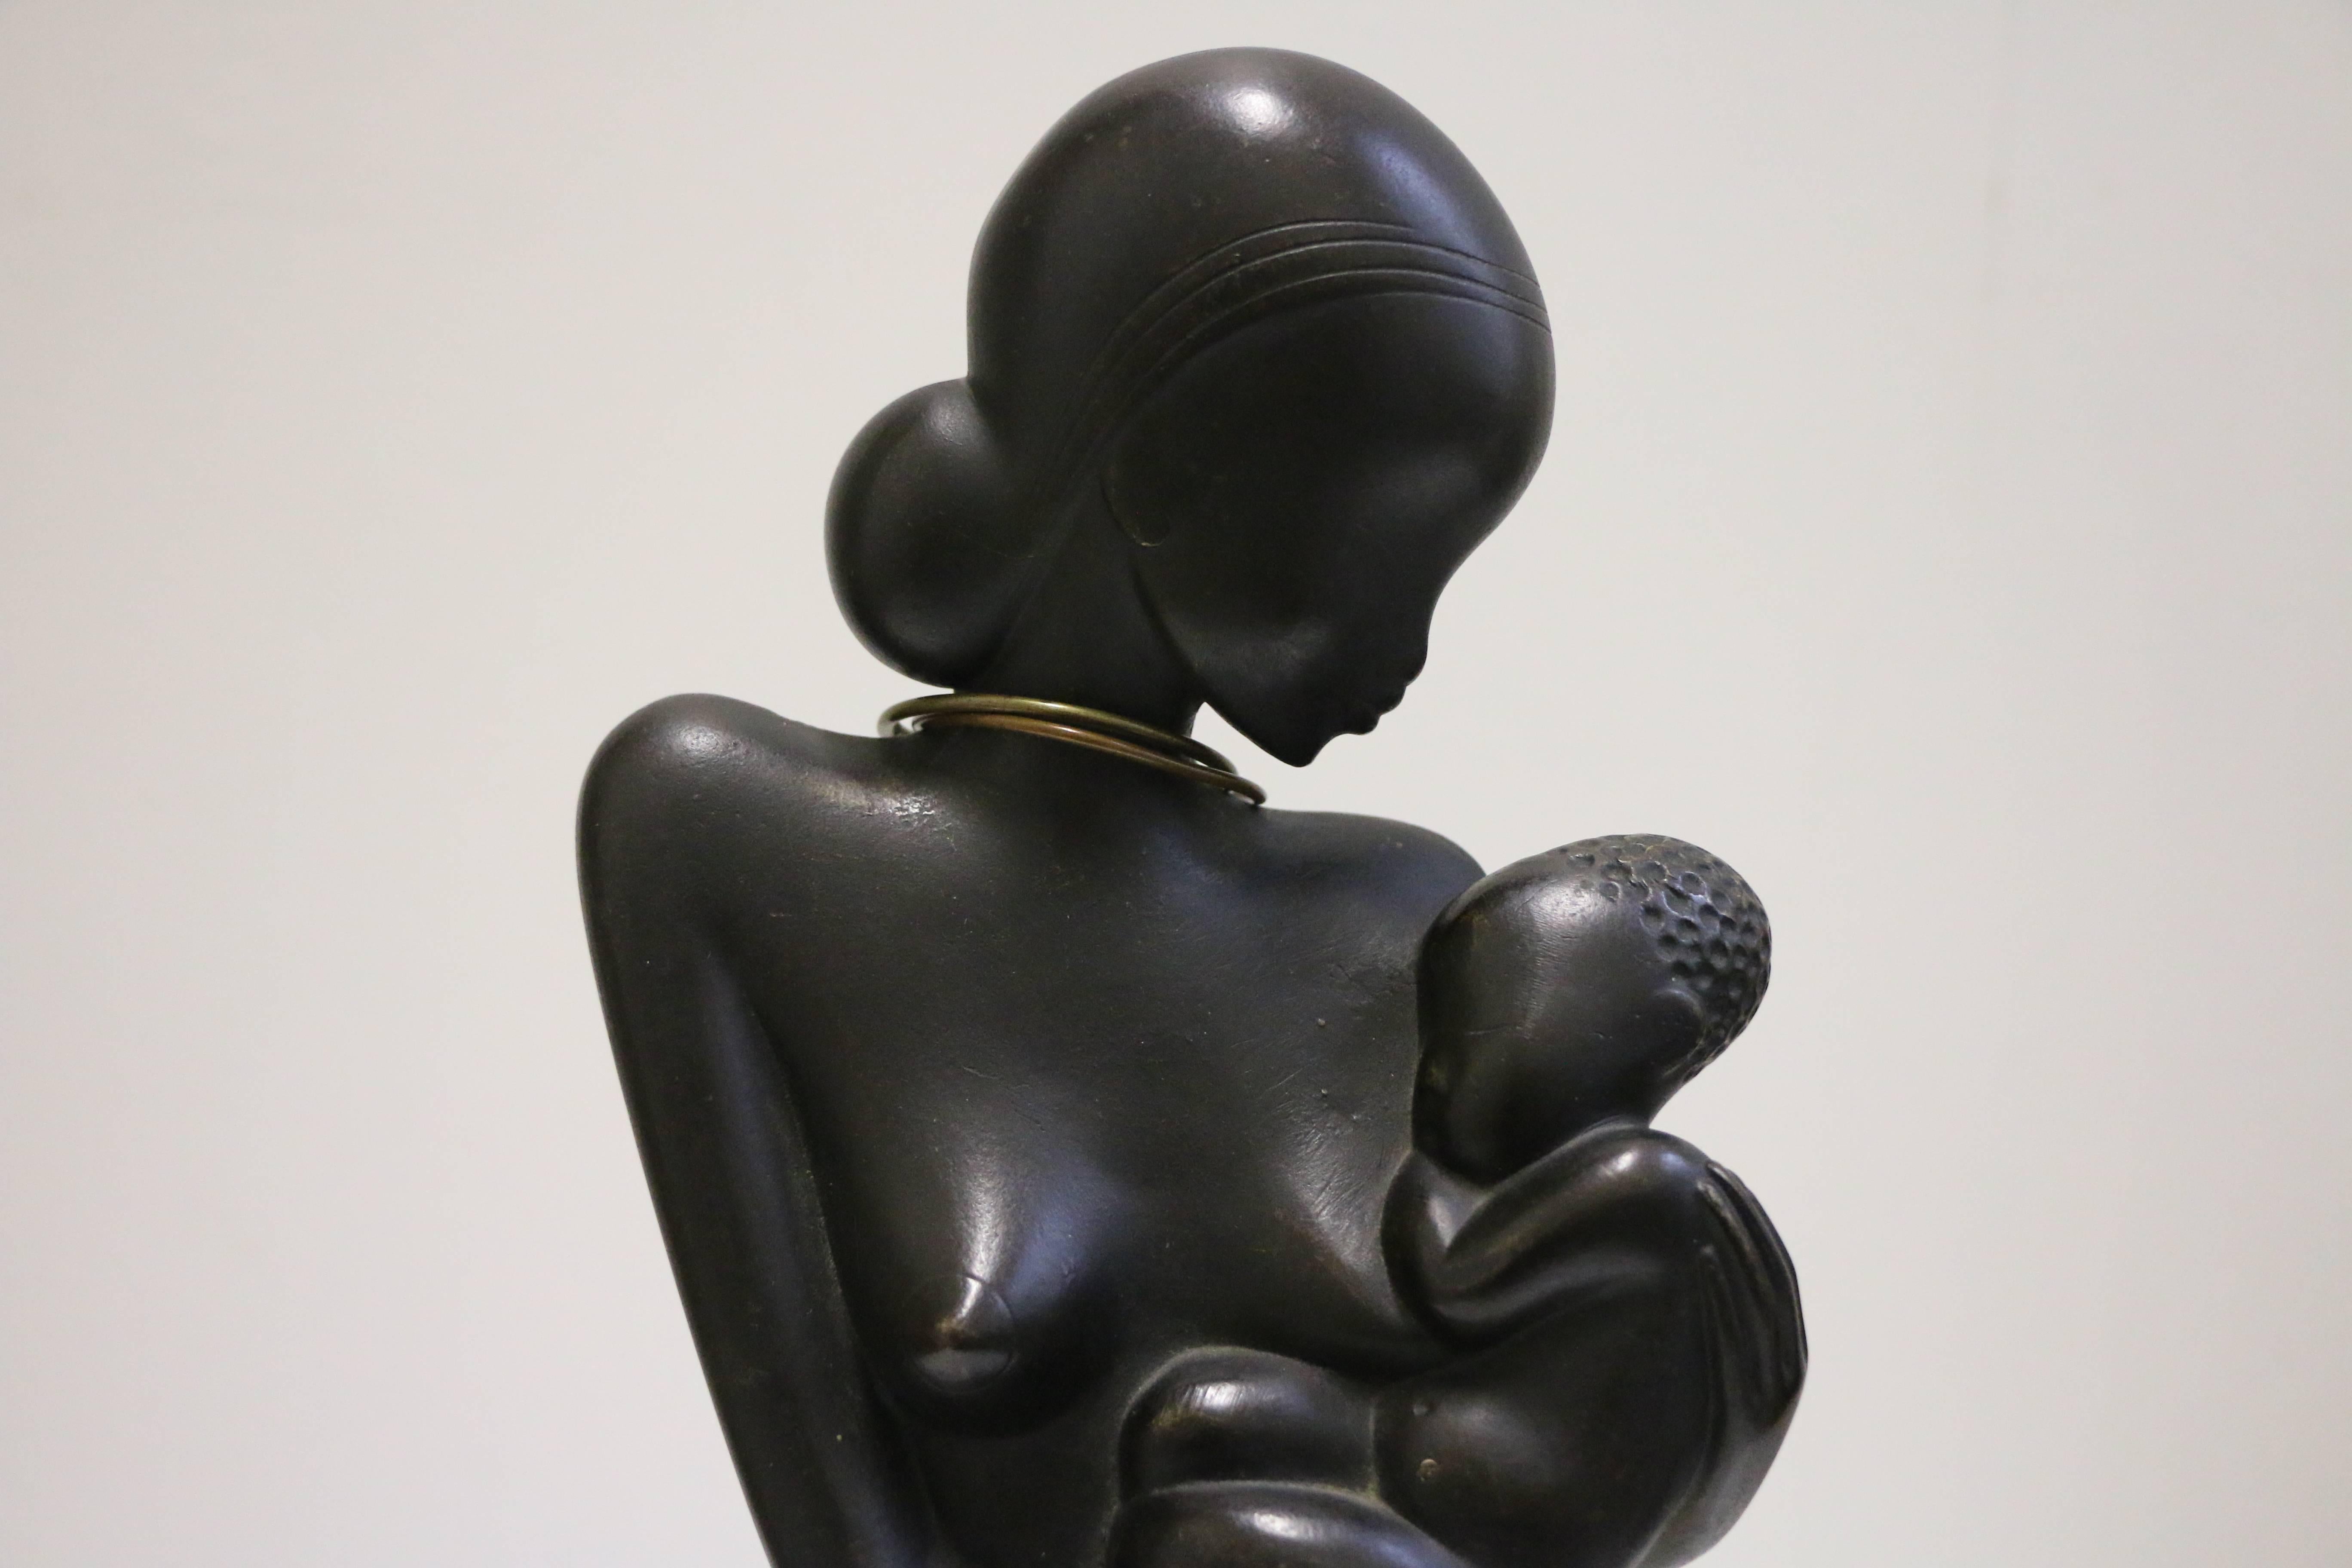 Art Deco sculpture representing a woman with a baby by Karl Hagenauer (1898- 1956). Bronze with dark patina, polished wood on a brass base. Stamp under the base: 